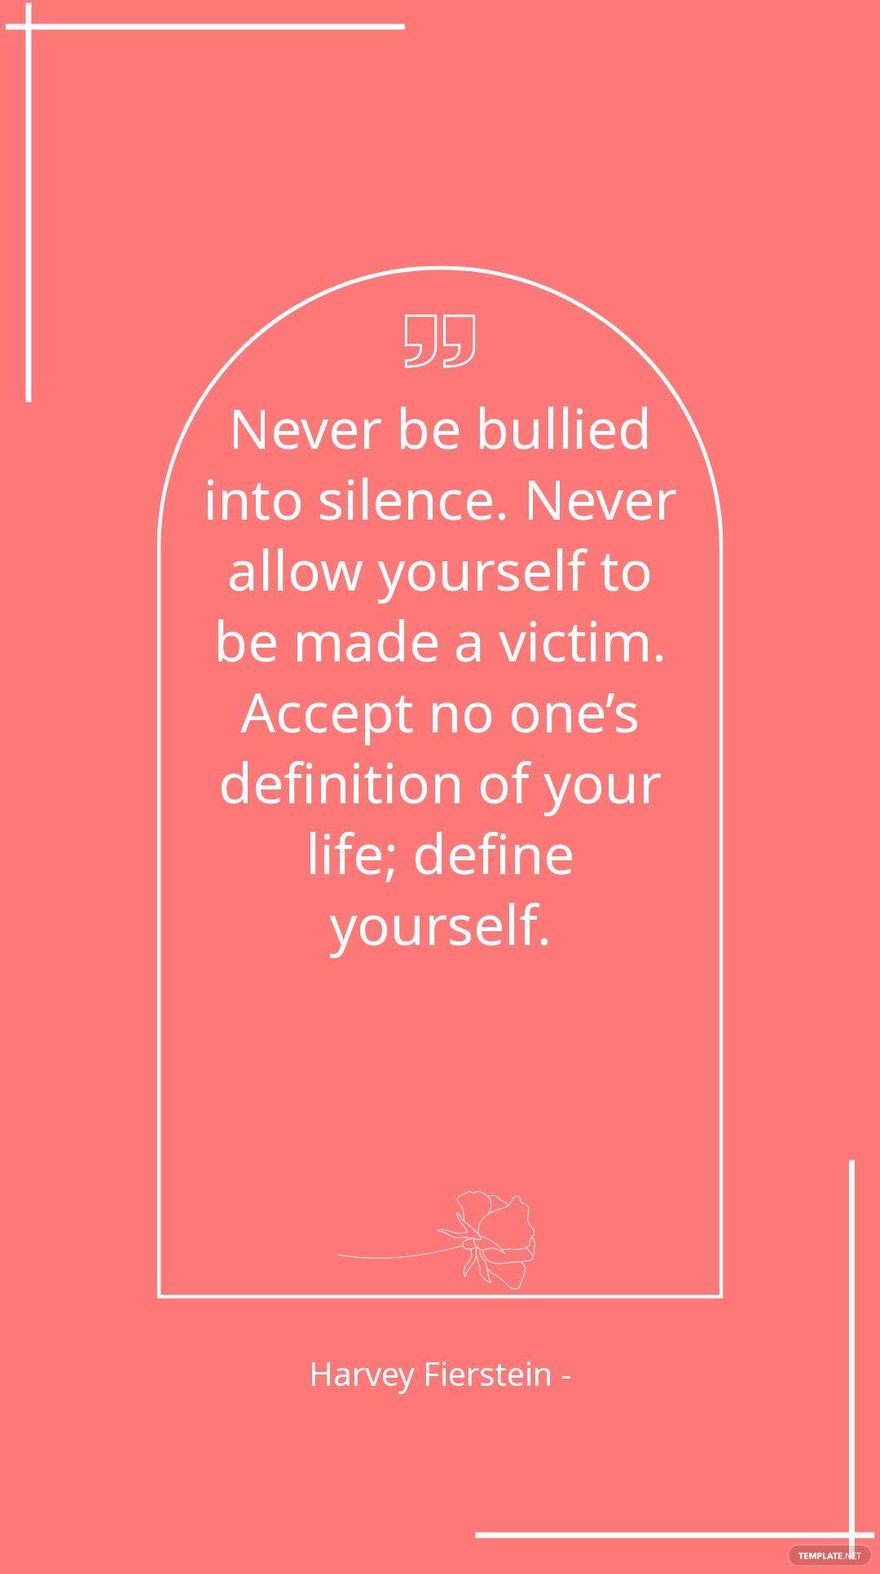 Harvey Fierstein - Never be bullied into silence. Never allow yourself to be made a victim. Accept no one’s definition of your life; define yourself.